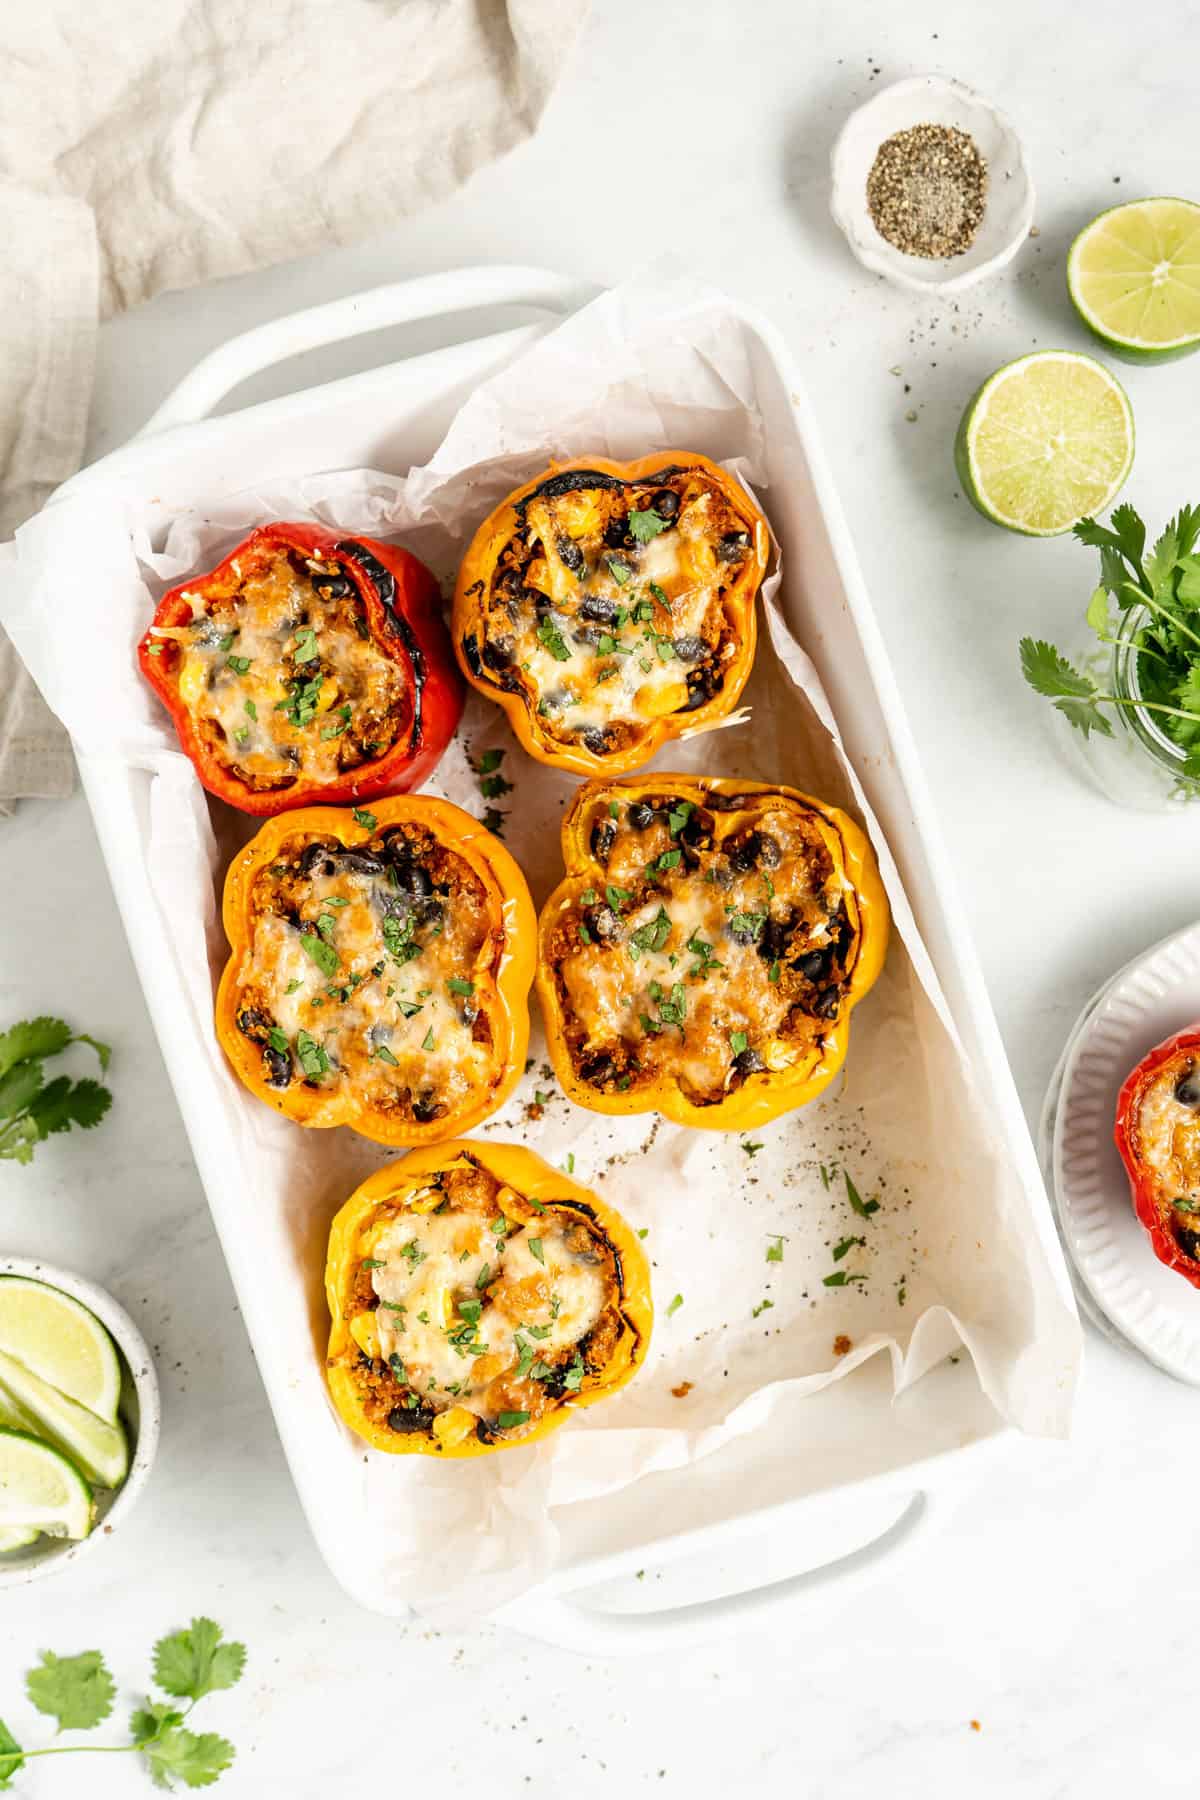 5 peppers stuffed with cheese, corn, black beans, and quinoa.